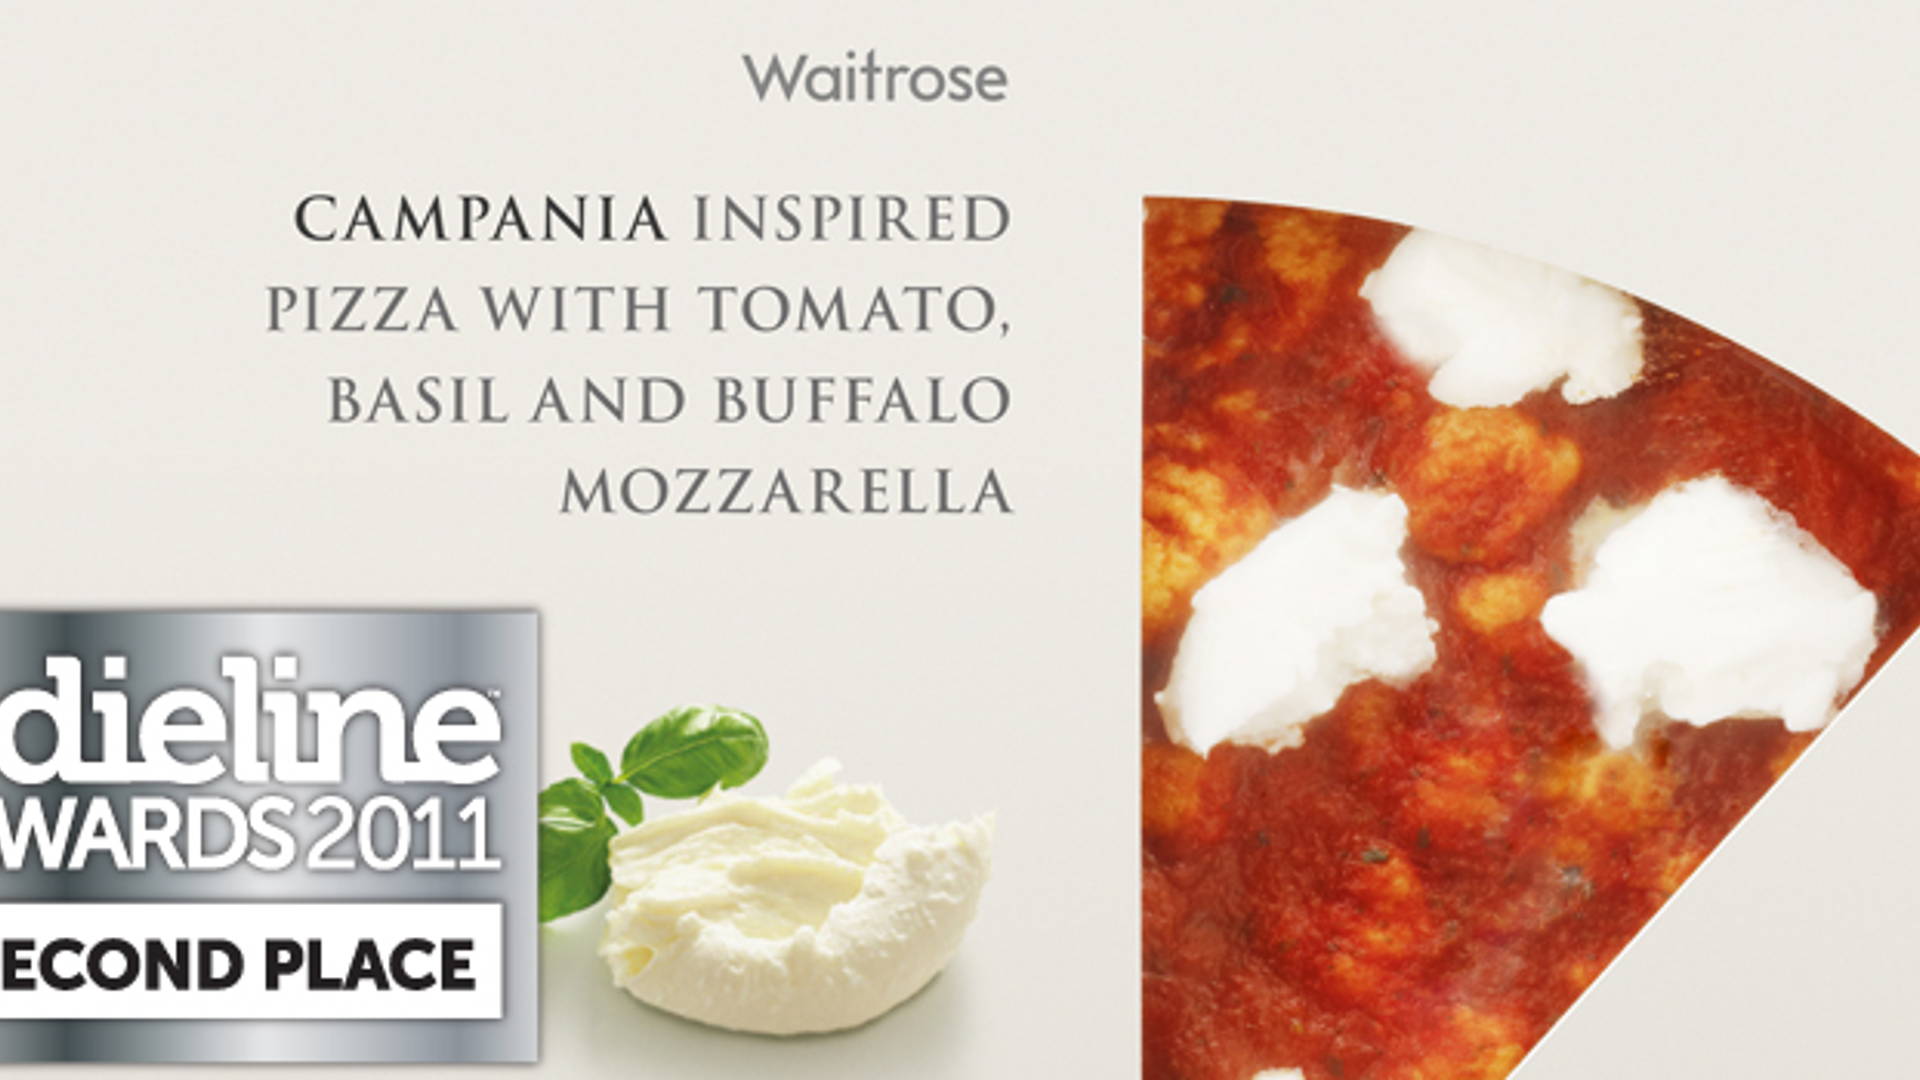 Featured image for The Dieline Awards 2011: Second Place - Waitrose Regional Pizzas